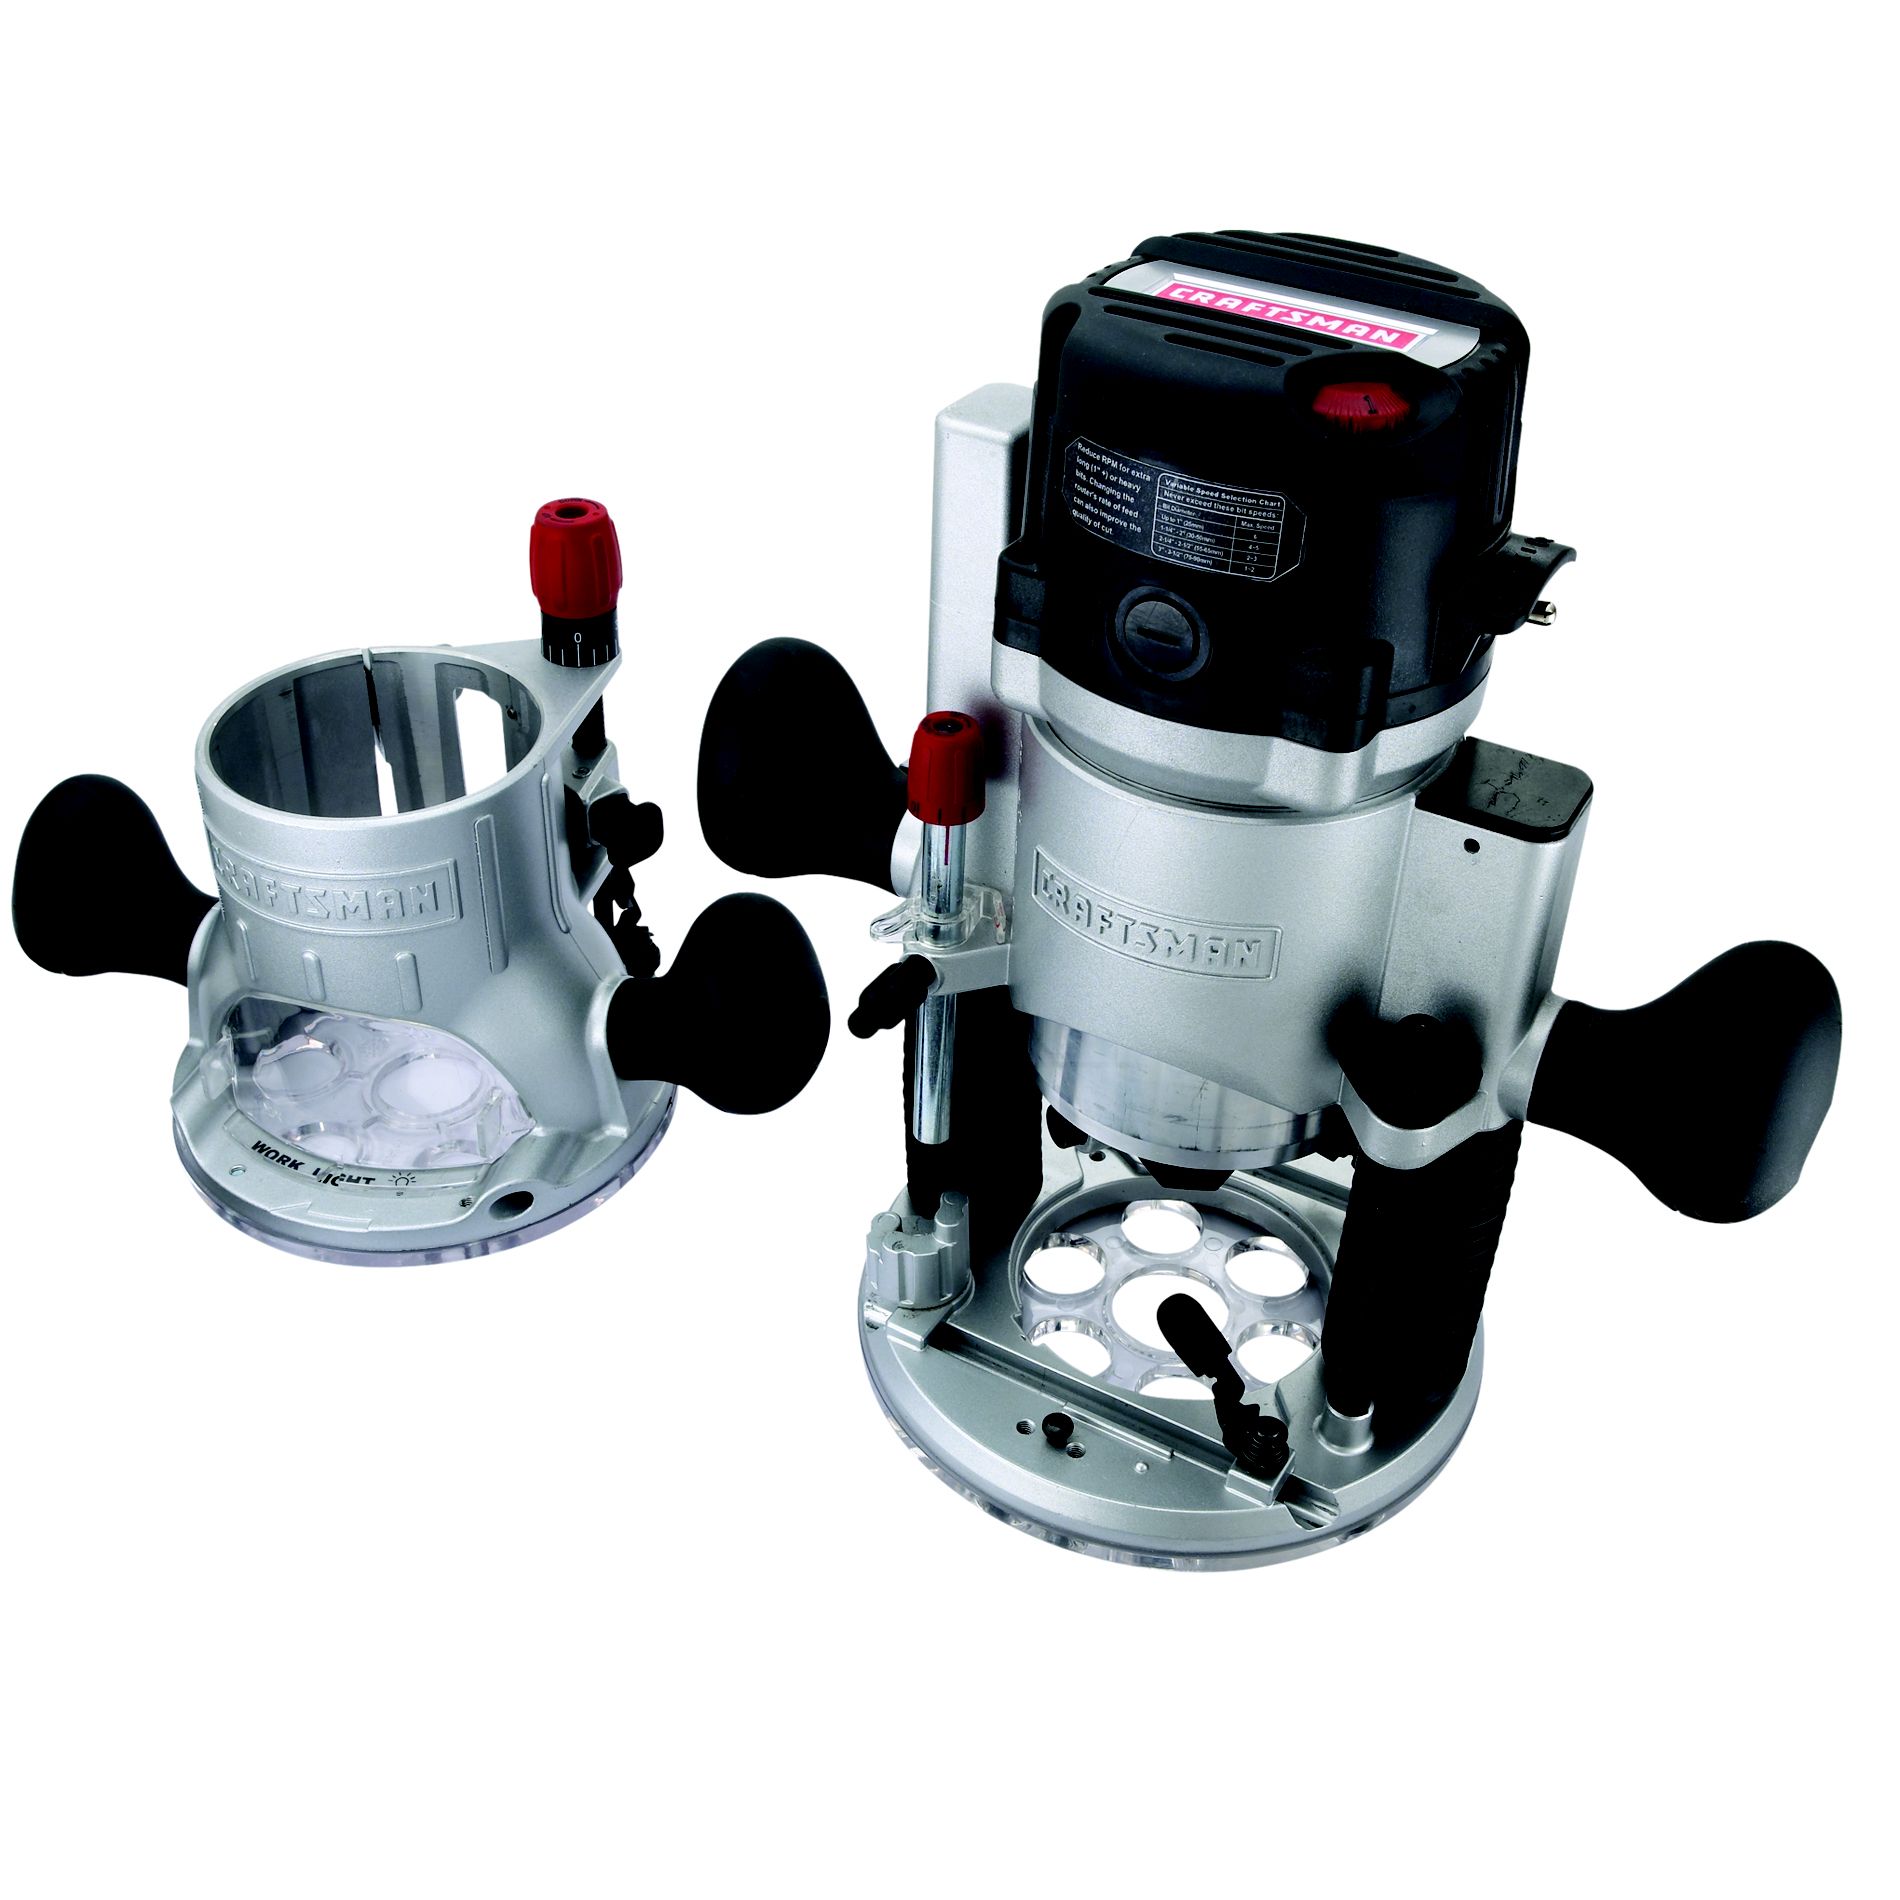 0692042000881 - 12-AMP, 2-HP FIXED/PLUNGE BASE ROUTER WITH SOFT START TECHNOLOGY